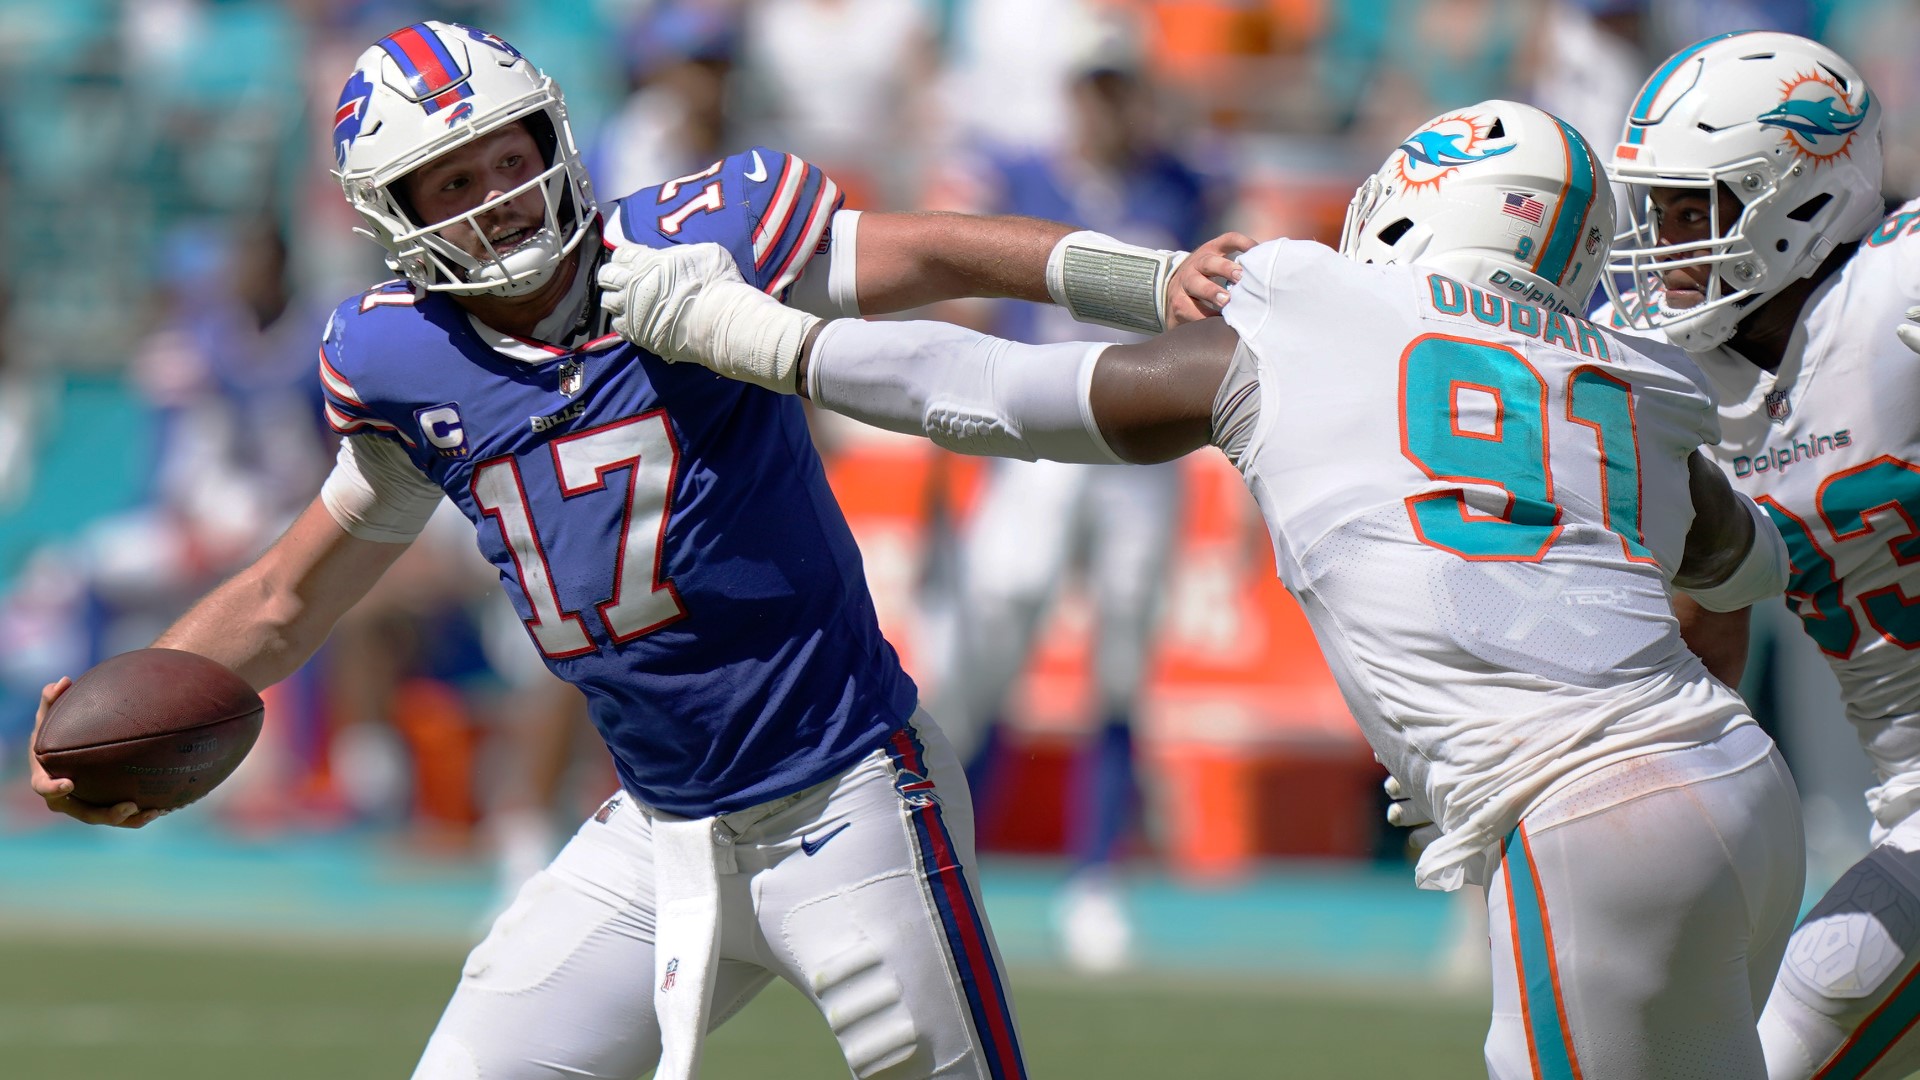 Channel 2 Sports Director Adam Benigni and WGRZ Bills/NFL Insider Vic Carucci discuss the Bills' Week 3 road loss to the Miami Dolphins.